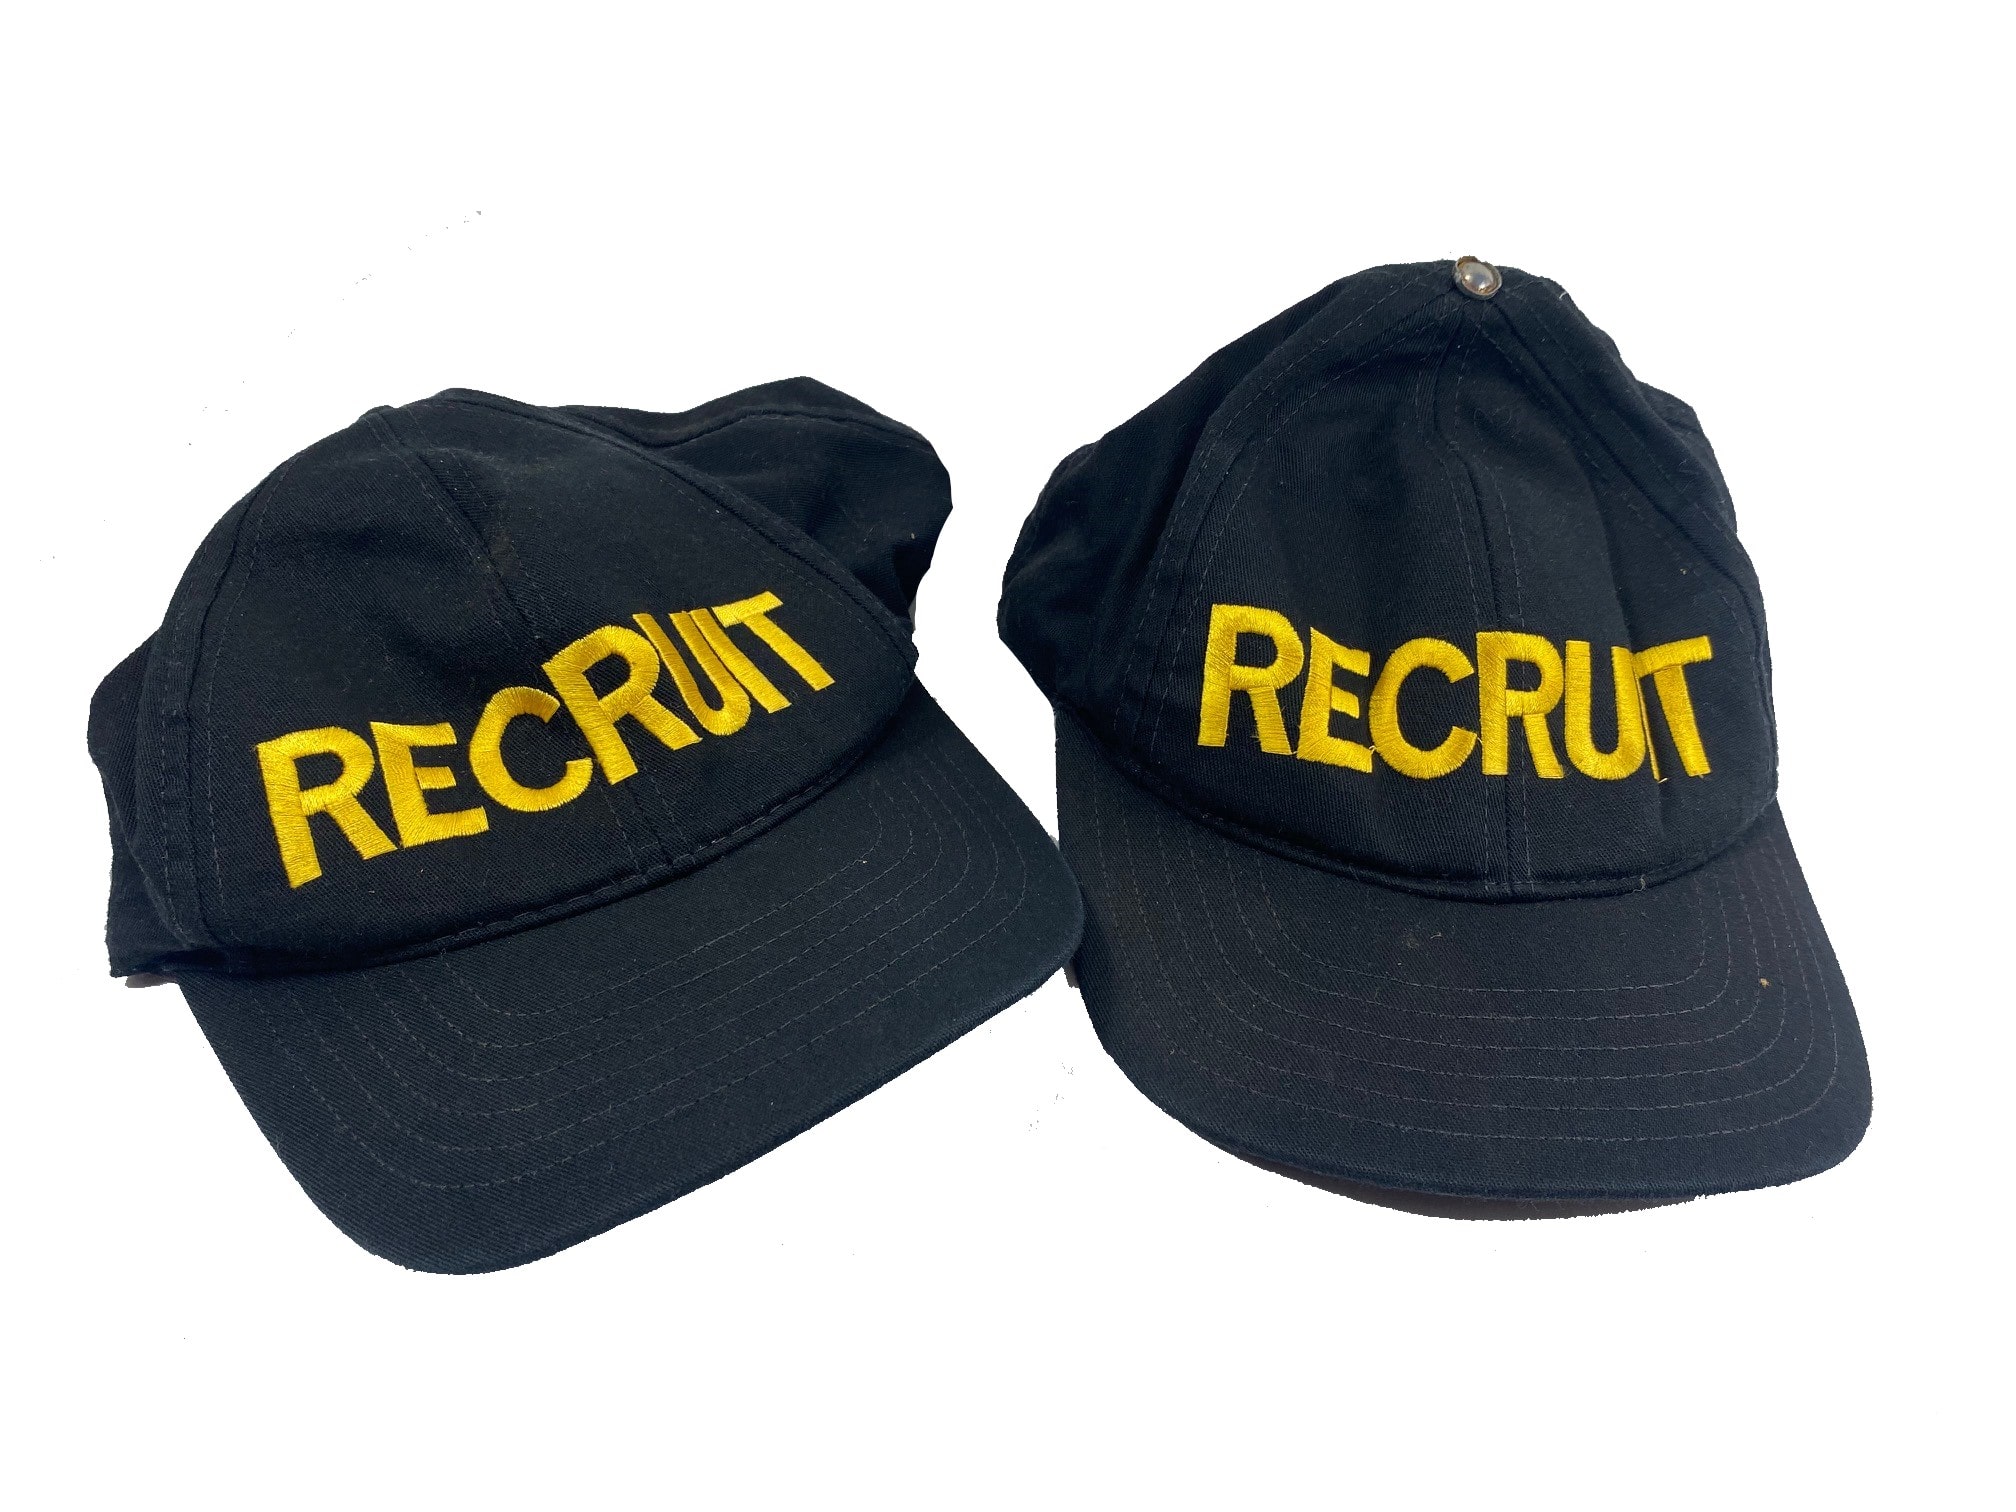 Recruit Hats, used - Omahas Army Navy Surplus